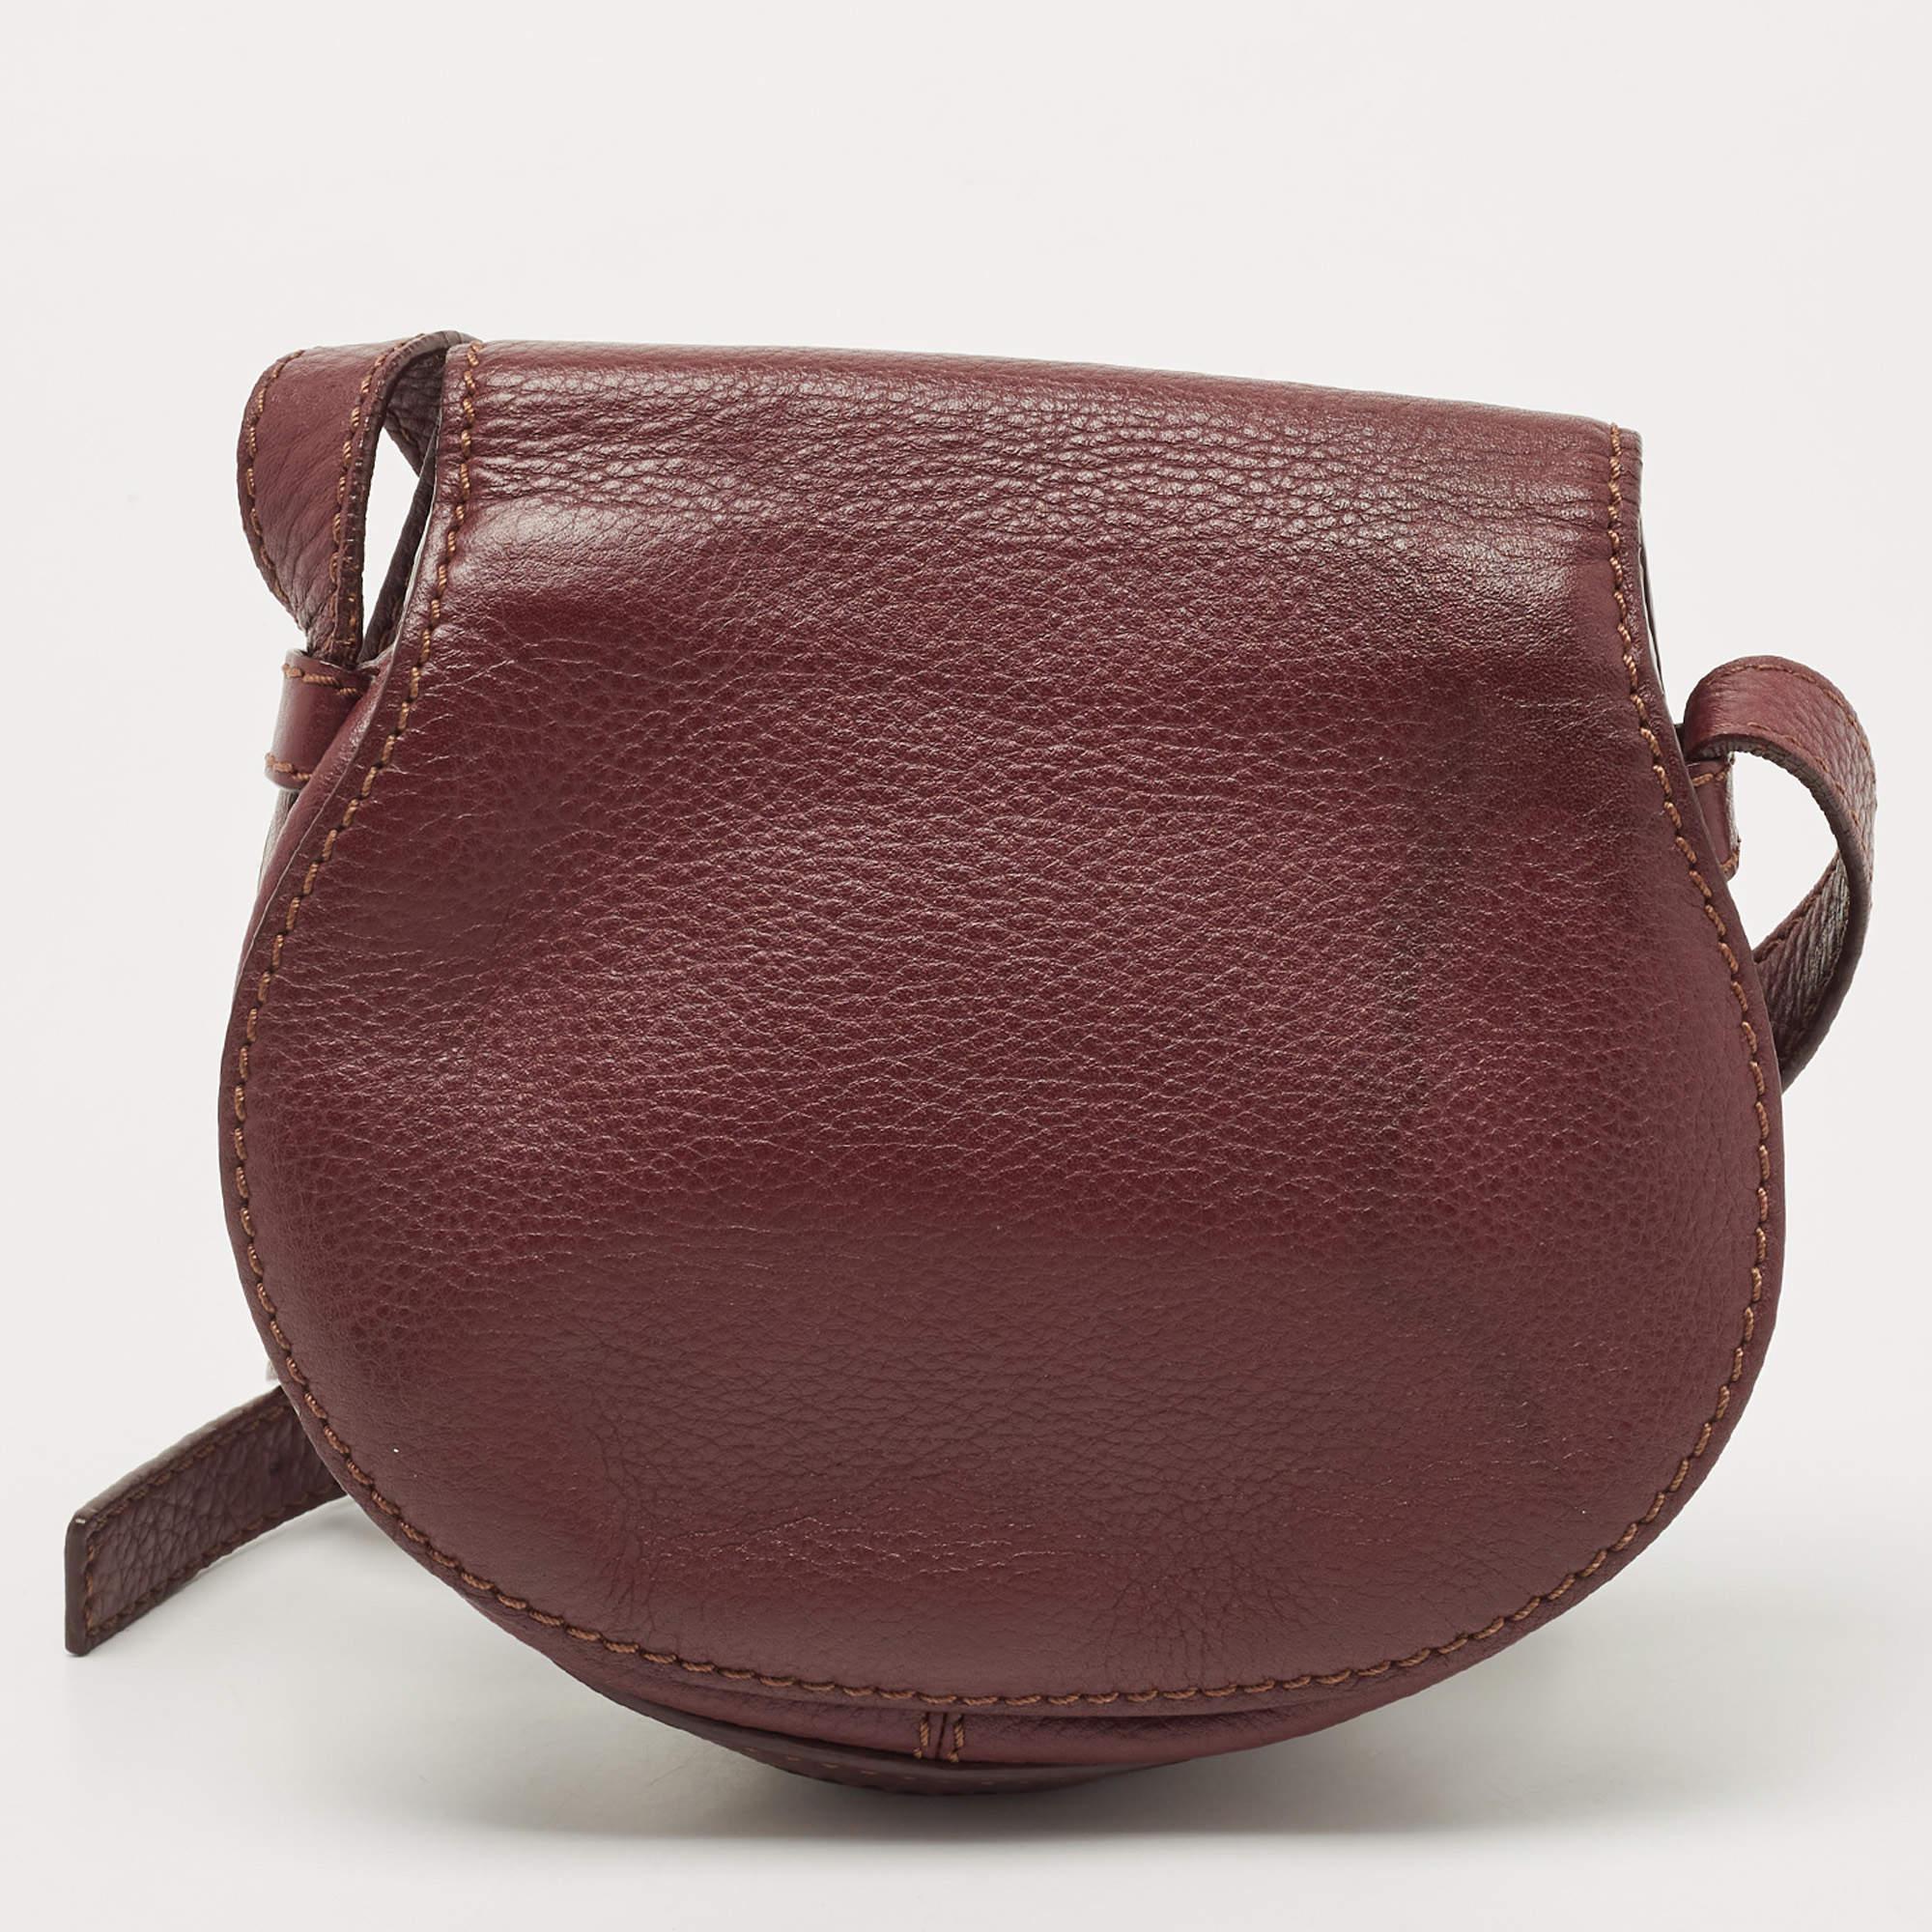 This Chloe mini Marcie bag is an example of the brand's fine designs that are skillfully crafted to project a classic charm. It is a functional creation with an elevating appeal.

Includes: Original Dustbag

